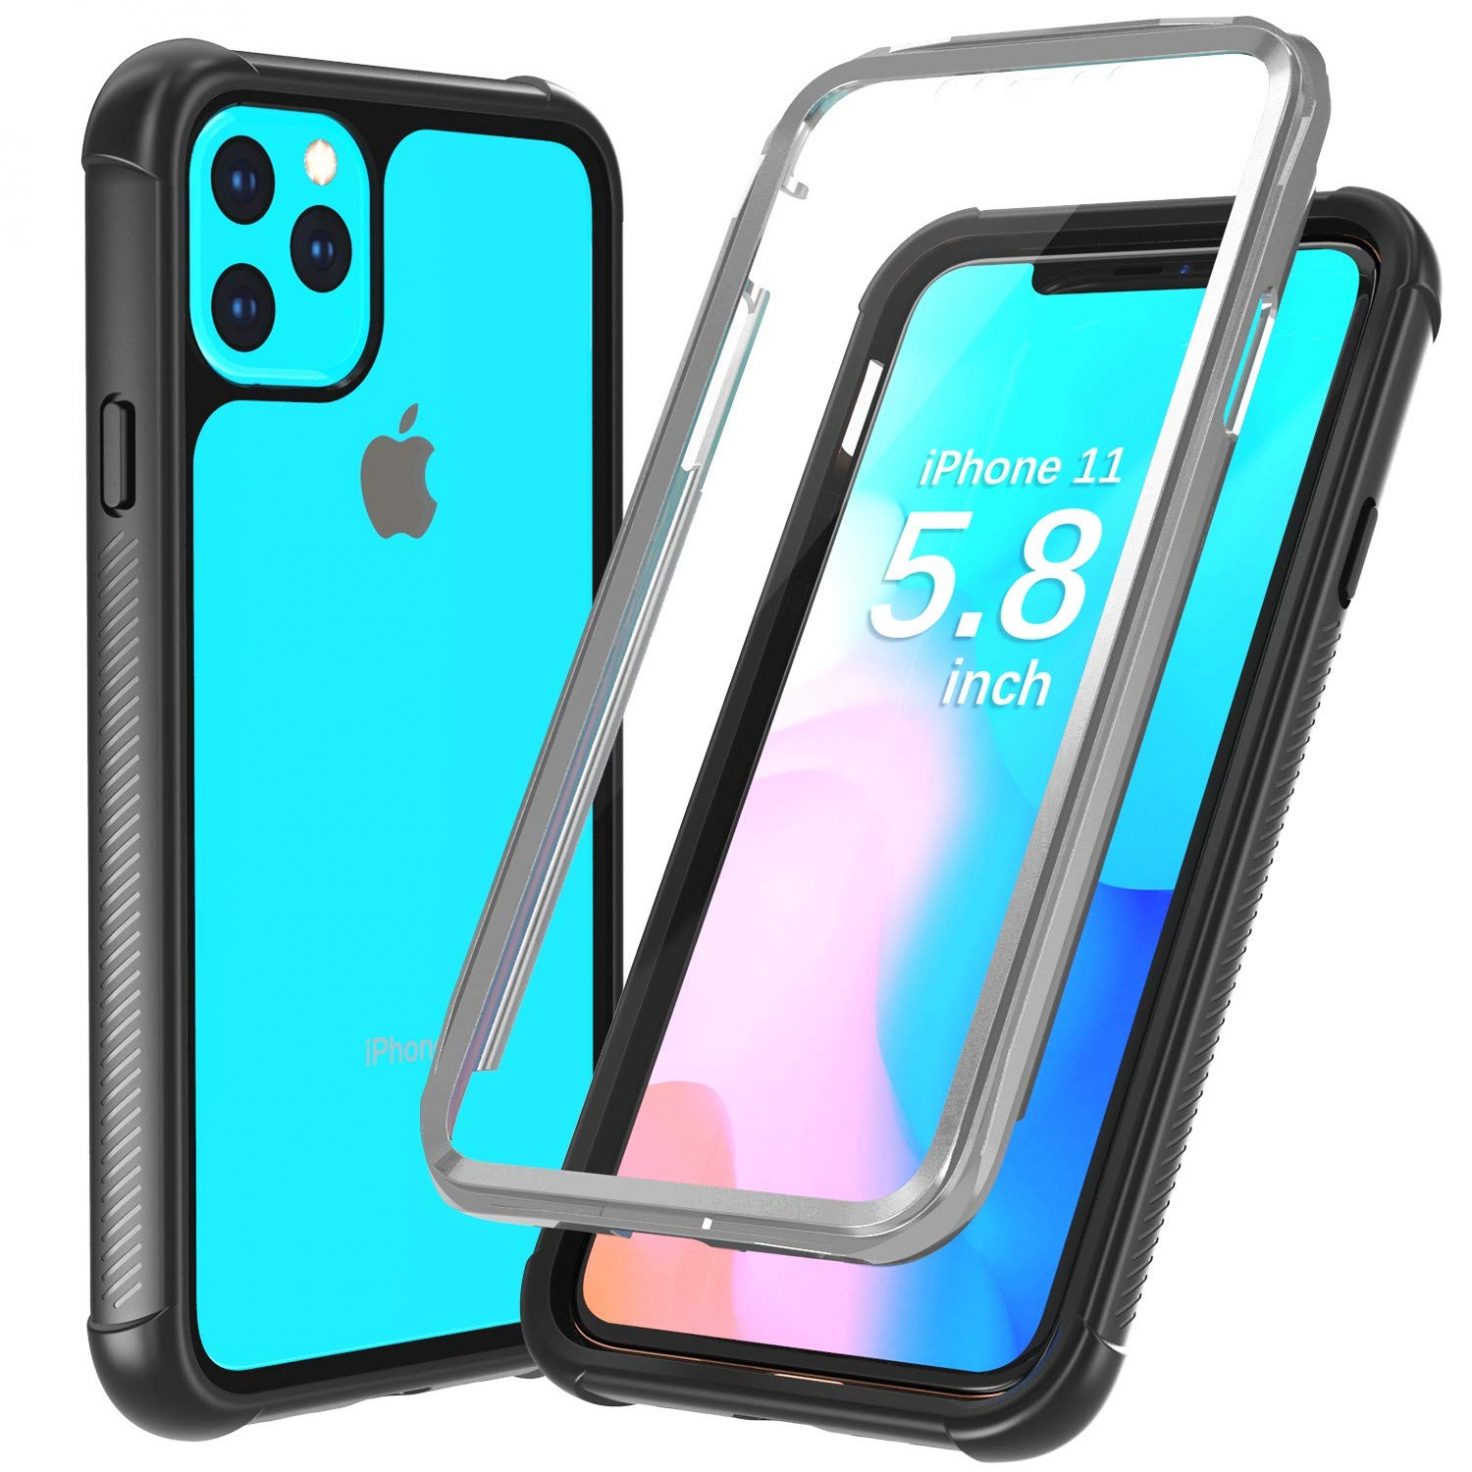 Justcool-iPhone-11-Pro-rugged-case-1472×1472